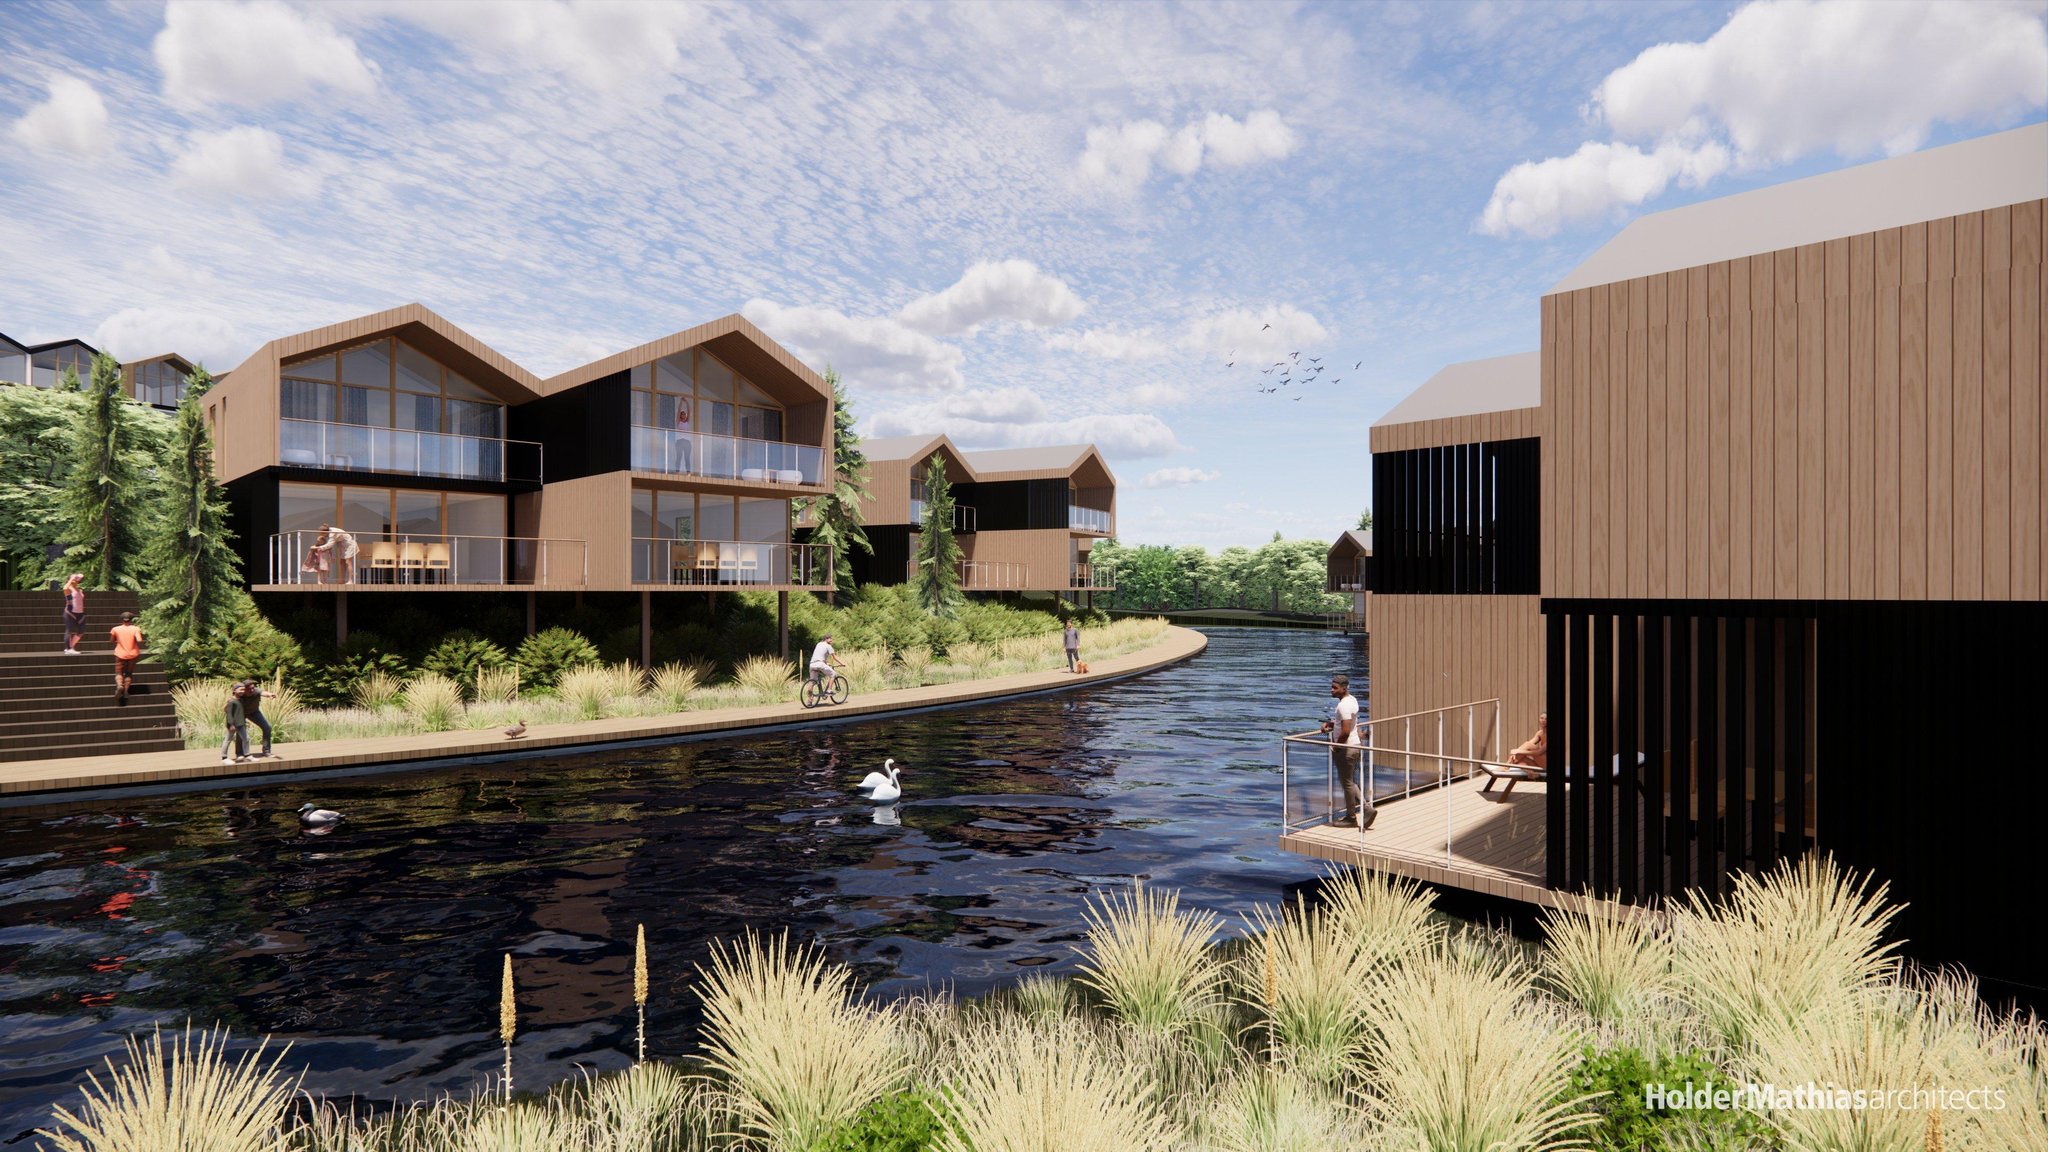 Plans for NI's 'first' £57m world class wellness resort